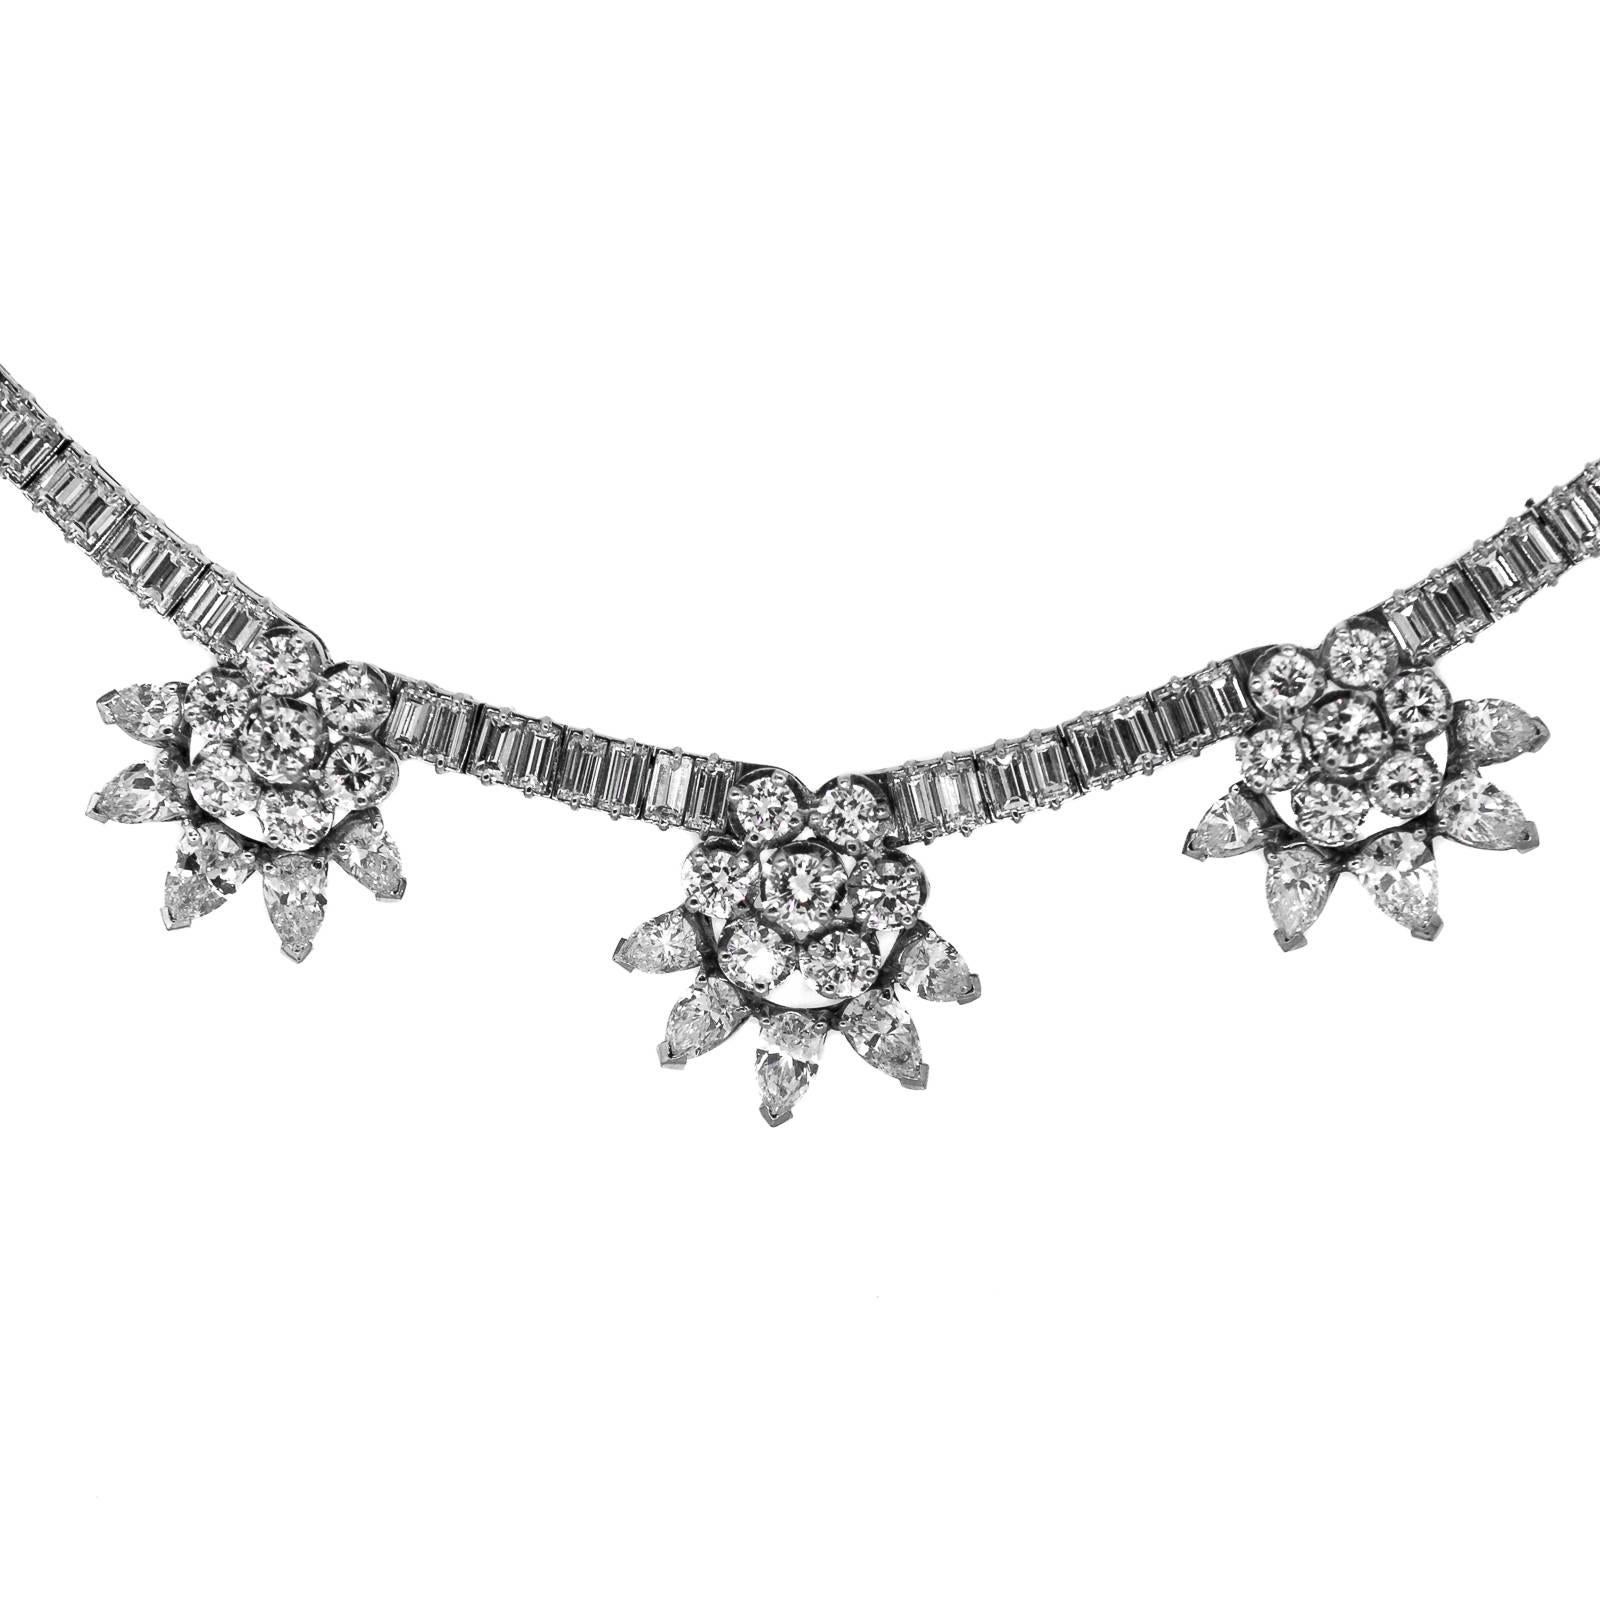 This beautiful platinum necklace has five dangling stars of Pear & Round Brilliant Cut Diamonds at its bottom, spaced between forty four Marquise Cut Diamonds. It is completed with fifty eight Round Brilliant Cuts and accented with twelve Marquise